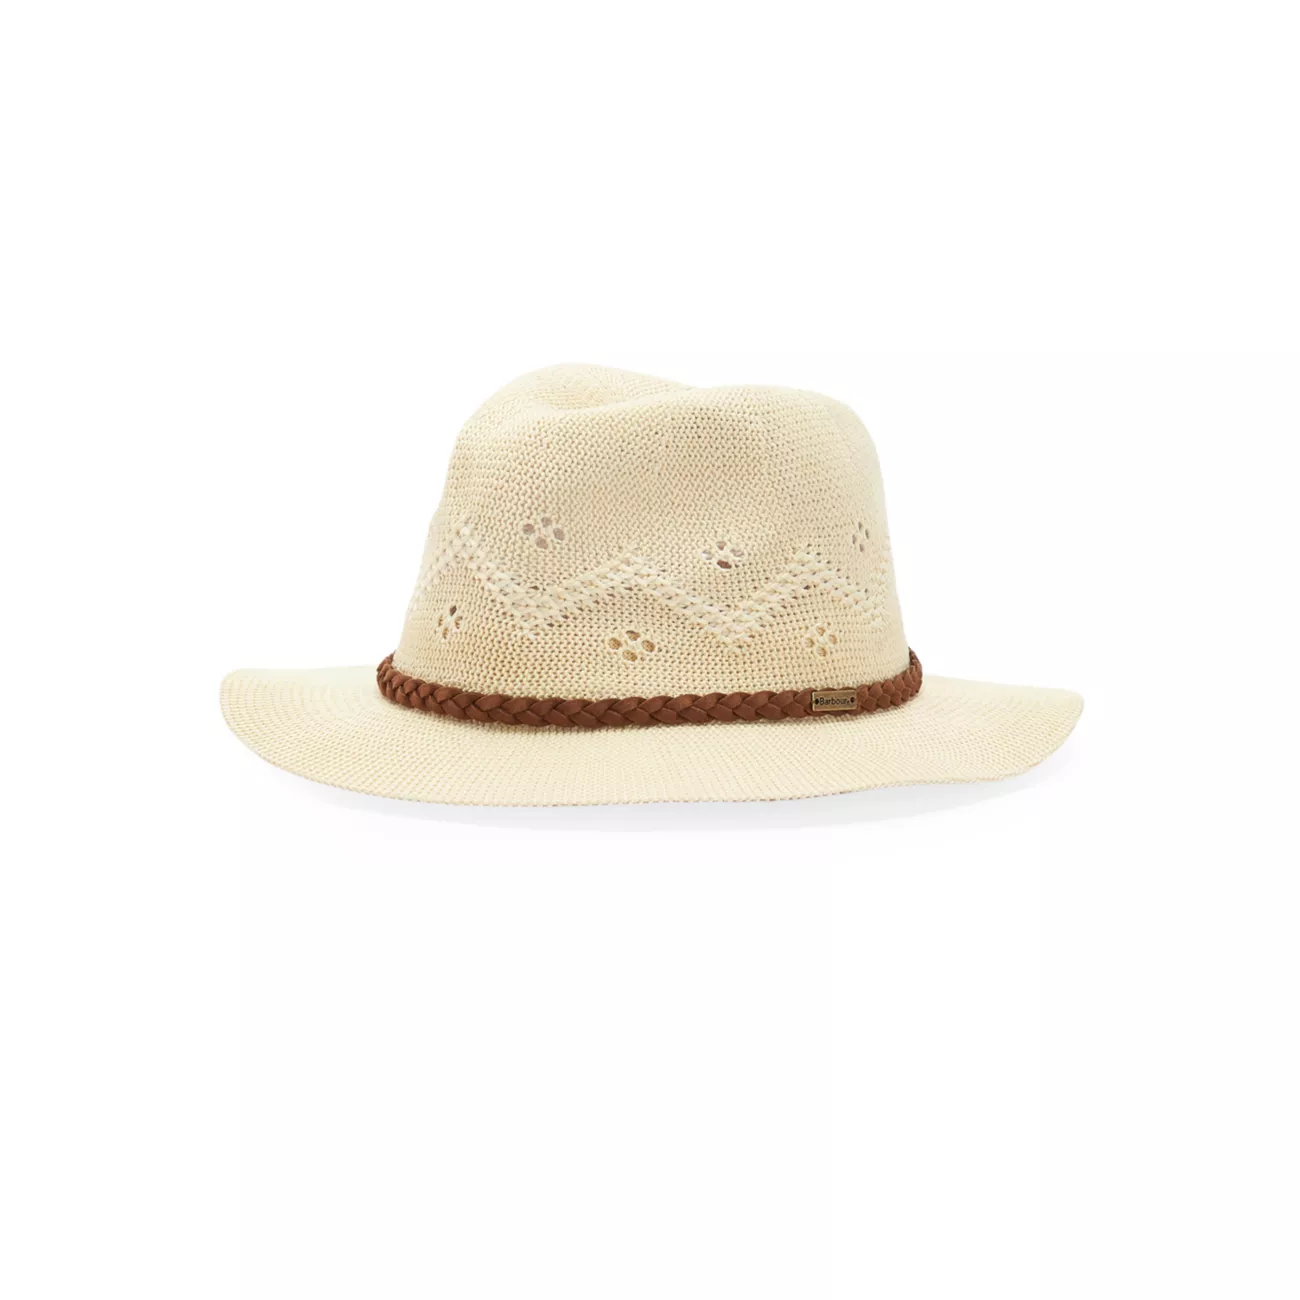 Flowerdale Trilby Crocheted Hat Barbour